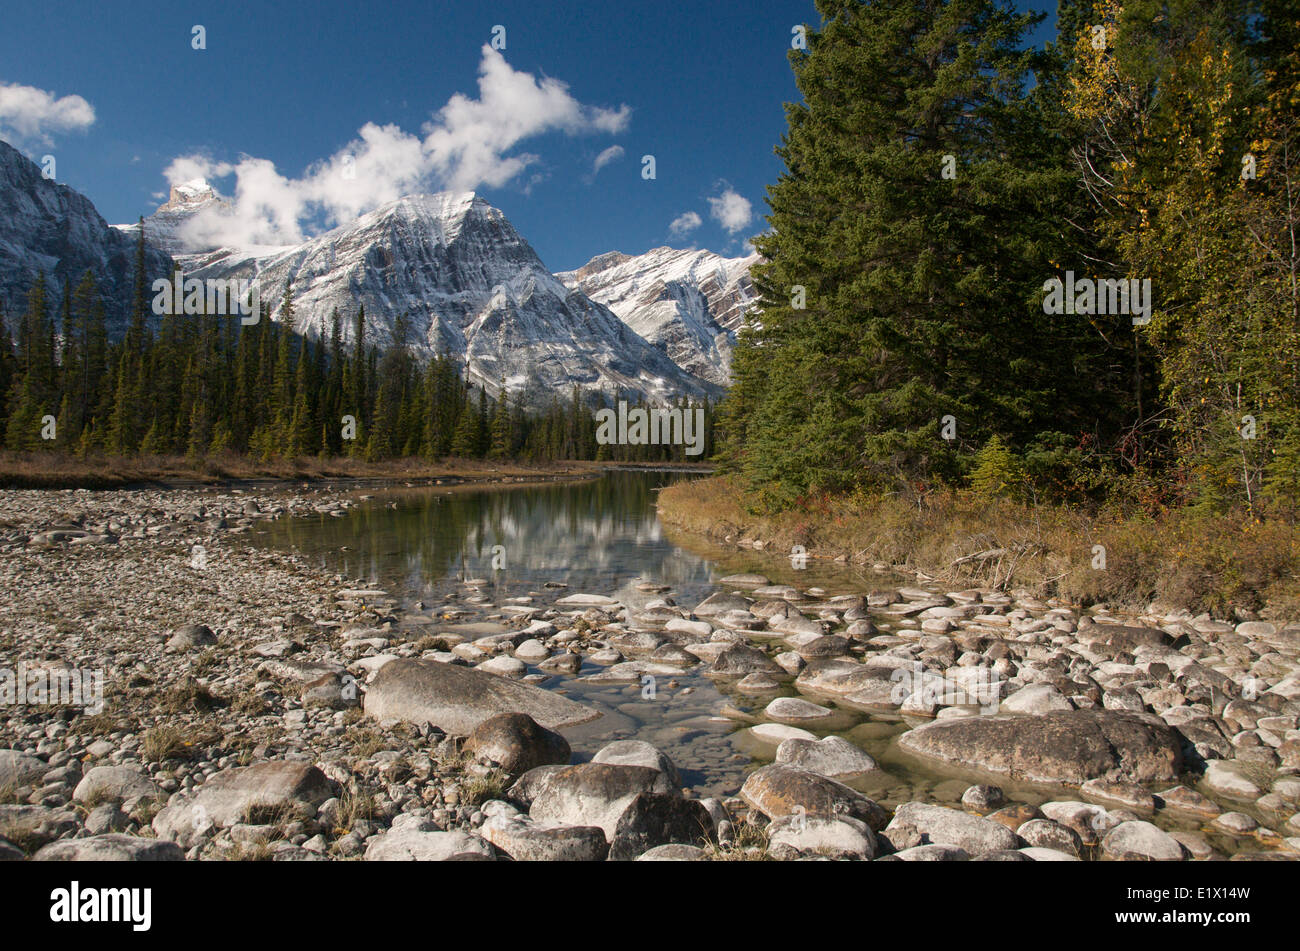 Scenic of Rocky Mountains along Hwy. 93 and Athabasca River, Jasper National Park, Alberta, Canada. Stock Photo